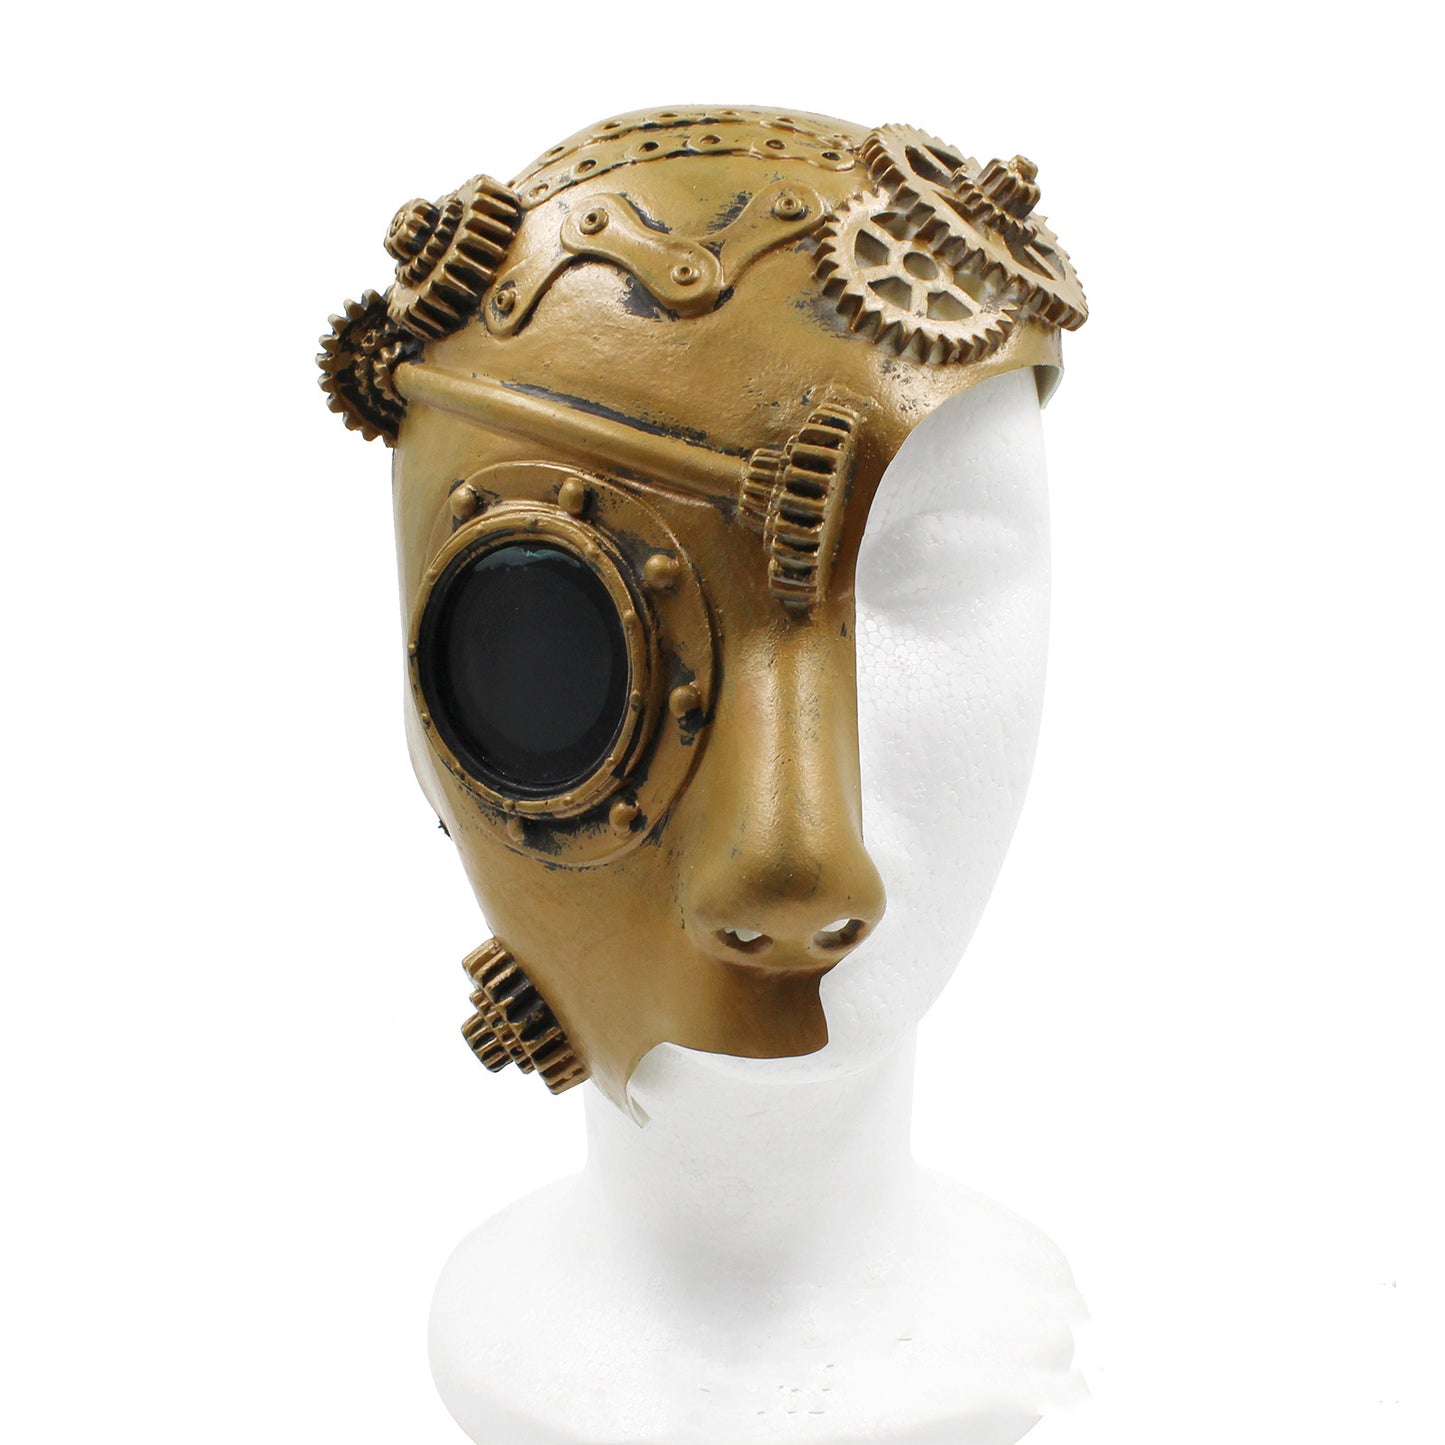 Steampunk Half Face Props Anime Game